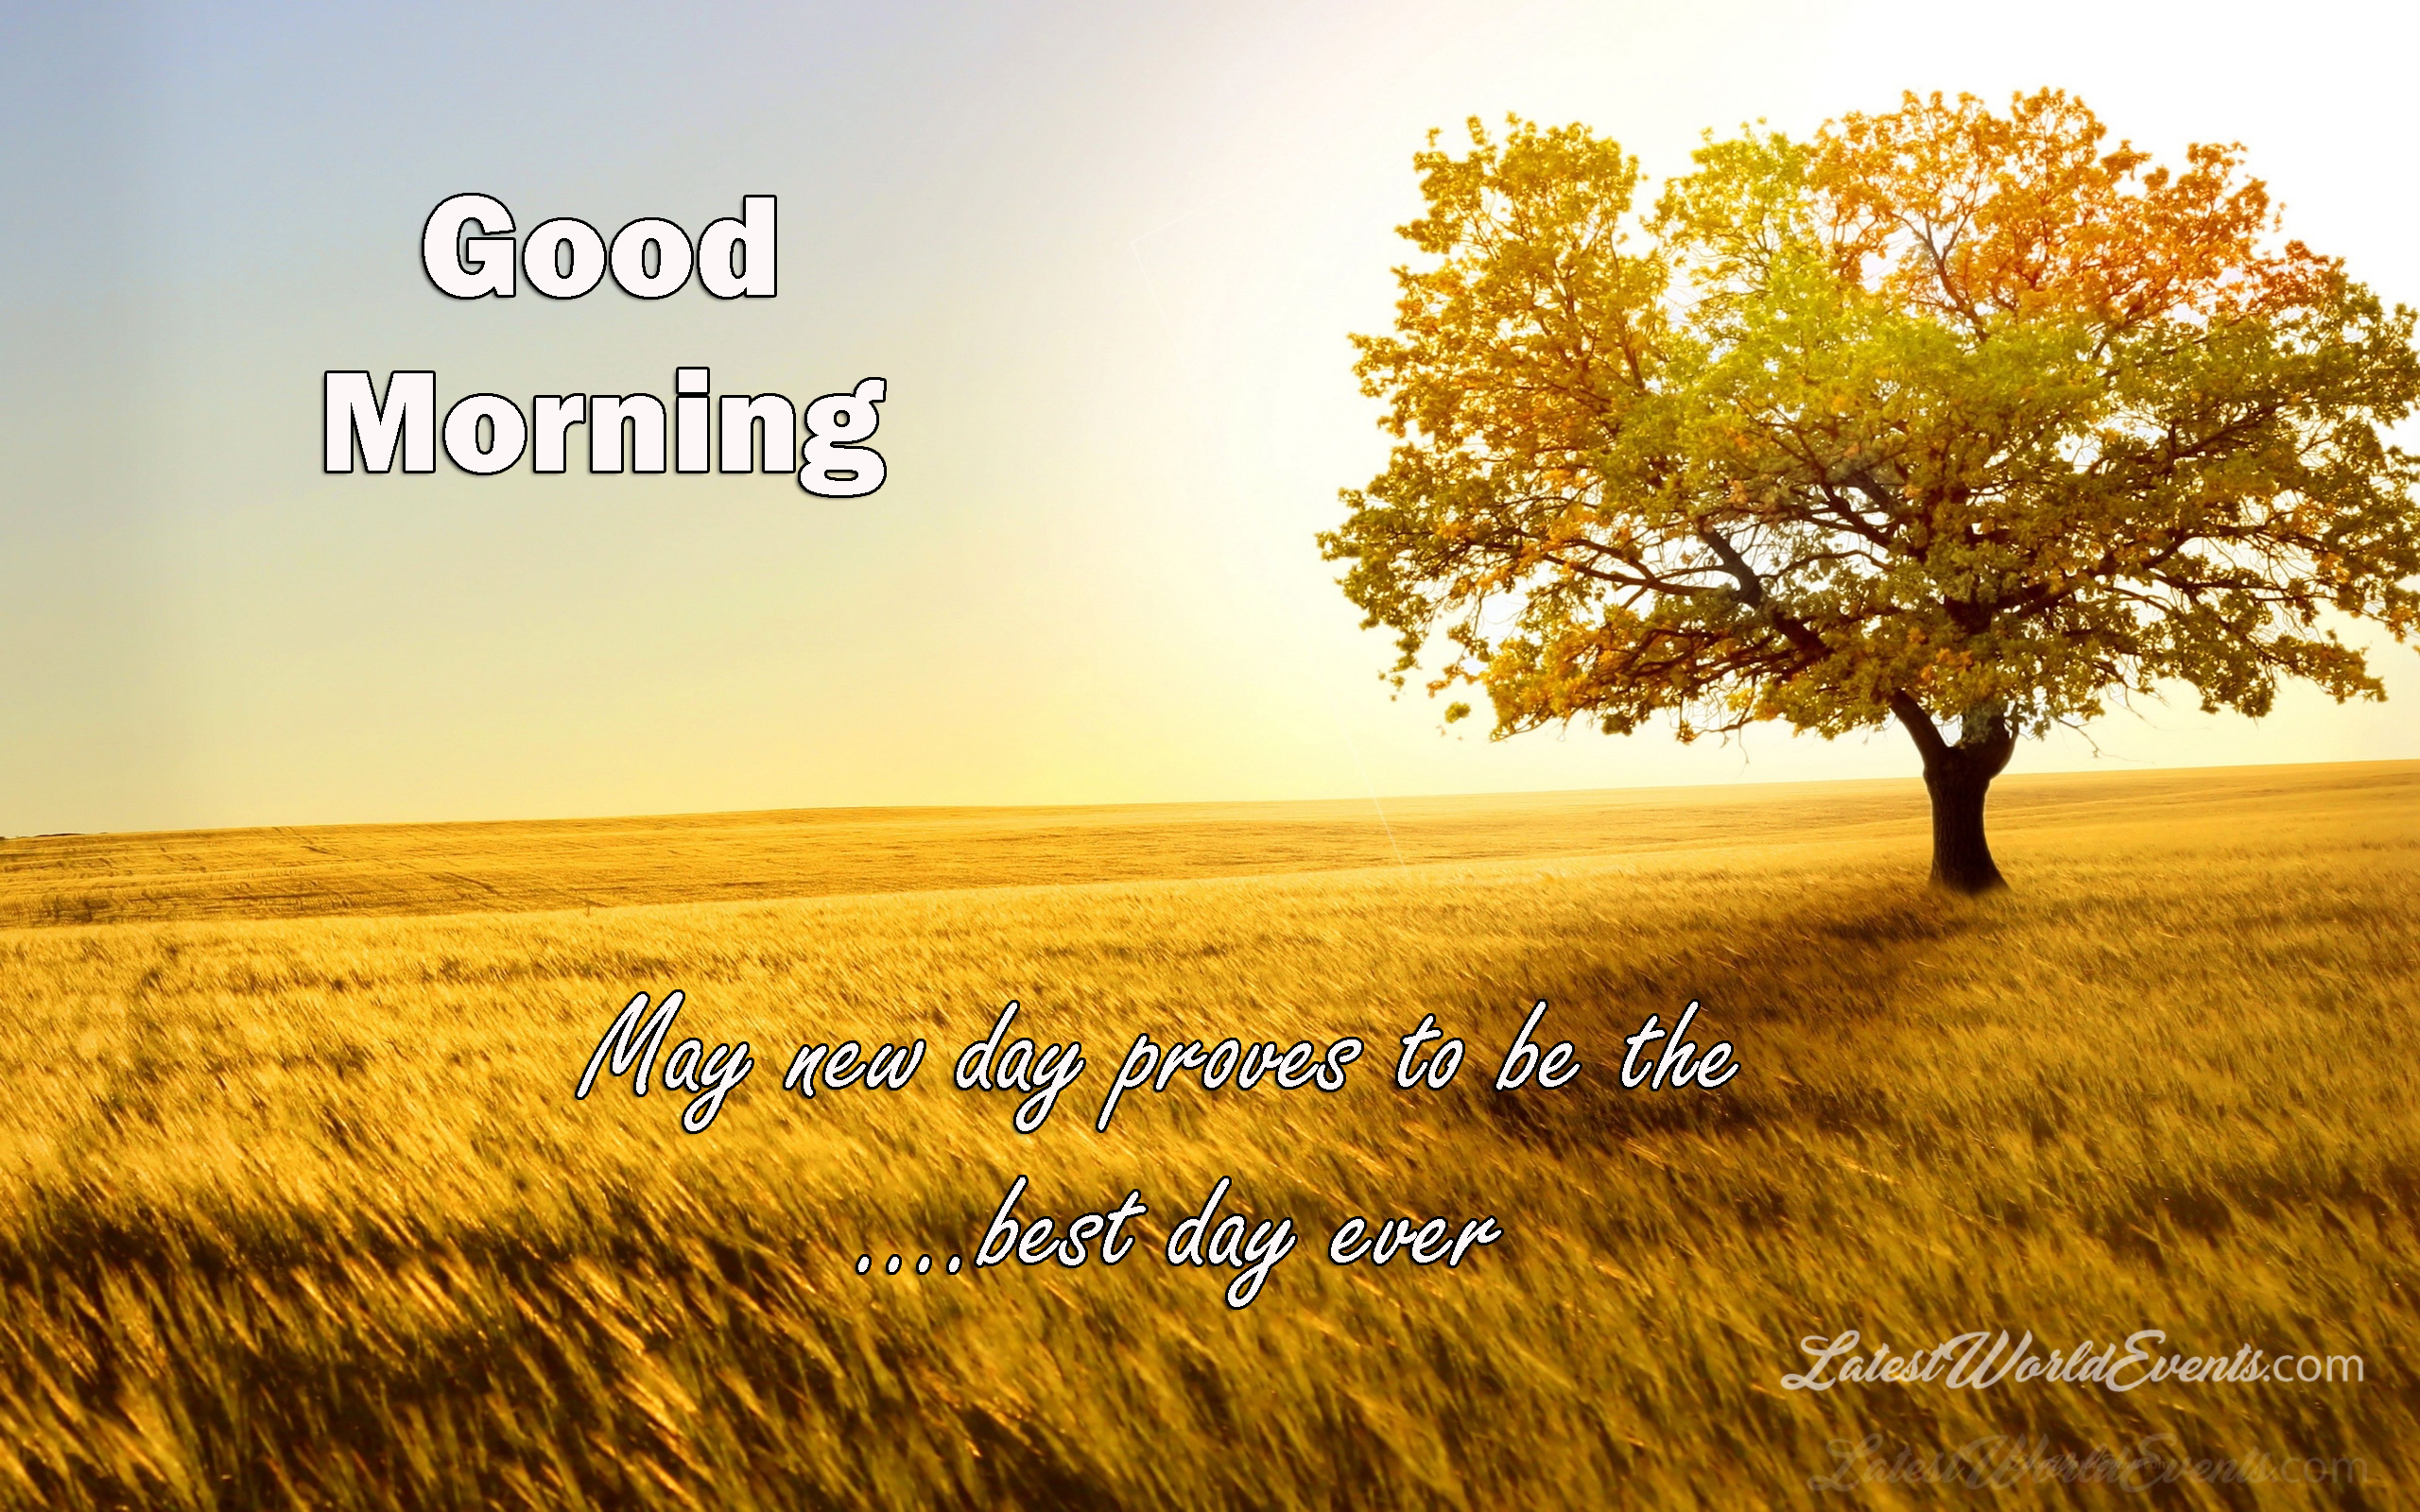 good-morning-images-cards-whishes-quotes